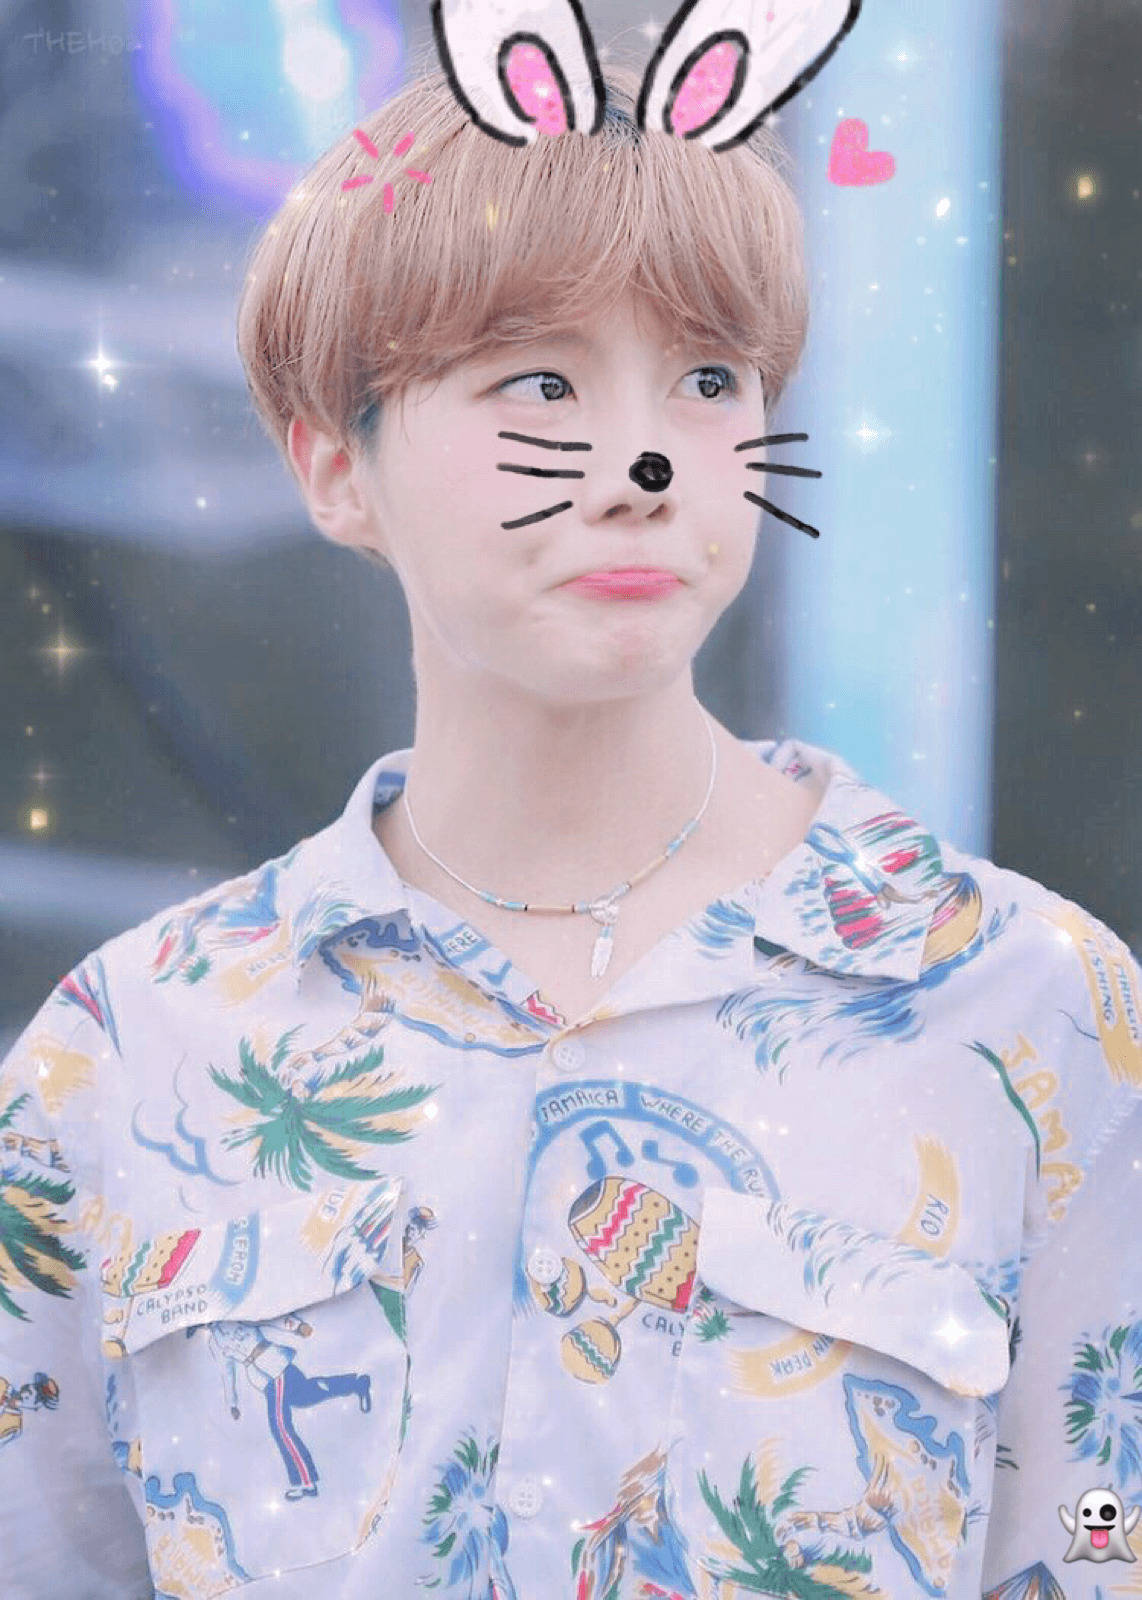 JHope Cute With Bunny Filter Wallpaper